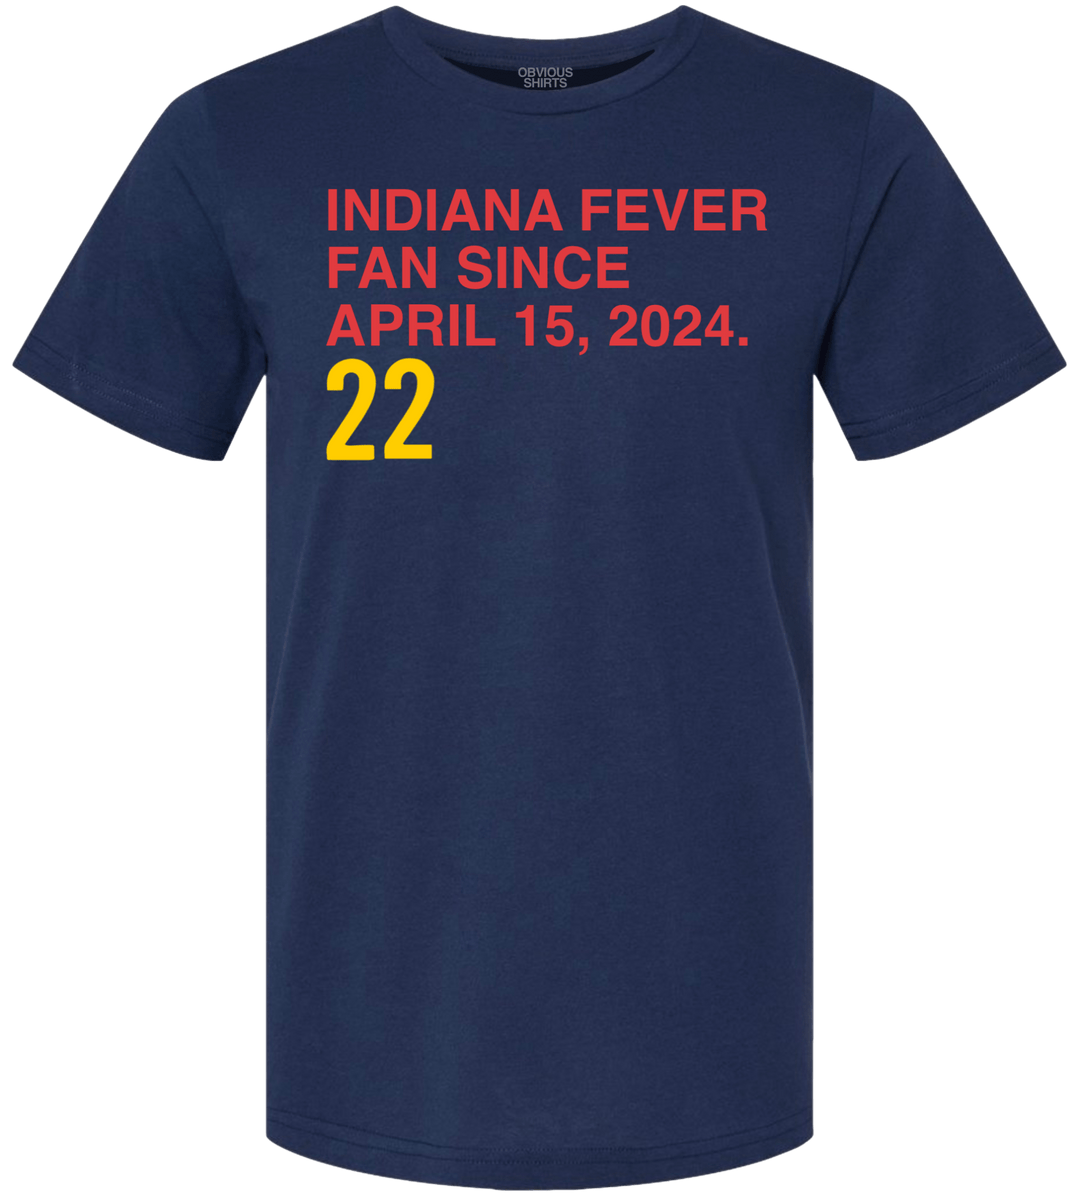 FEVER FAN SINCE APRIL 15, 2024. - OBVIOUS SHIRTS